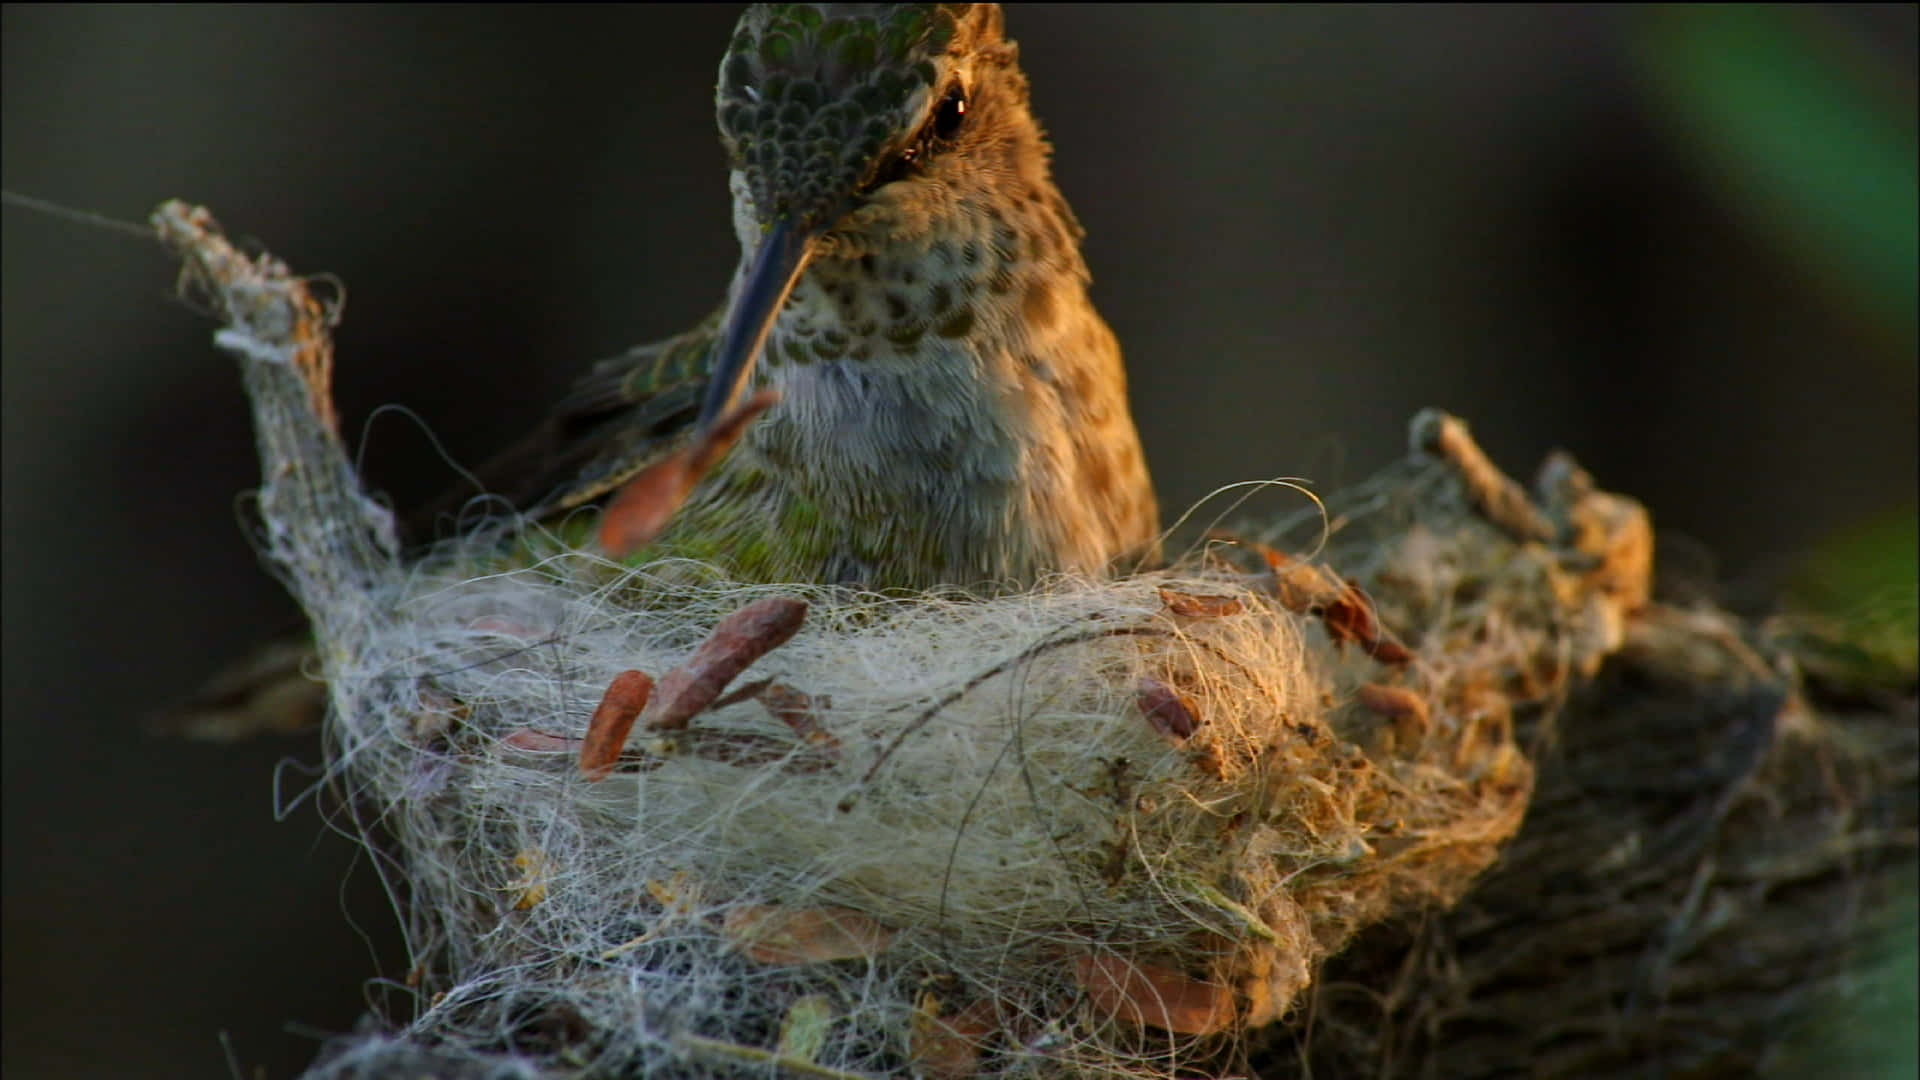 A hummingbird nest built with subtly-colored twigs